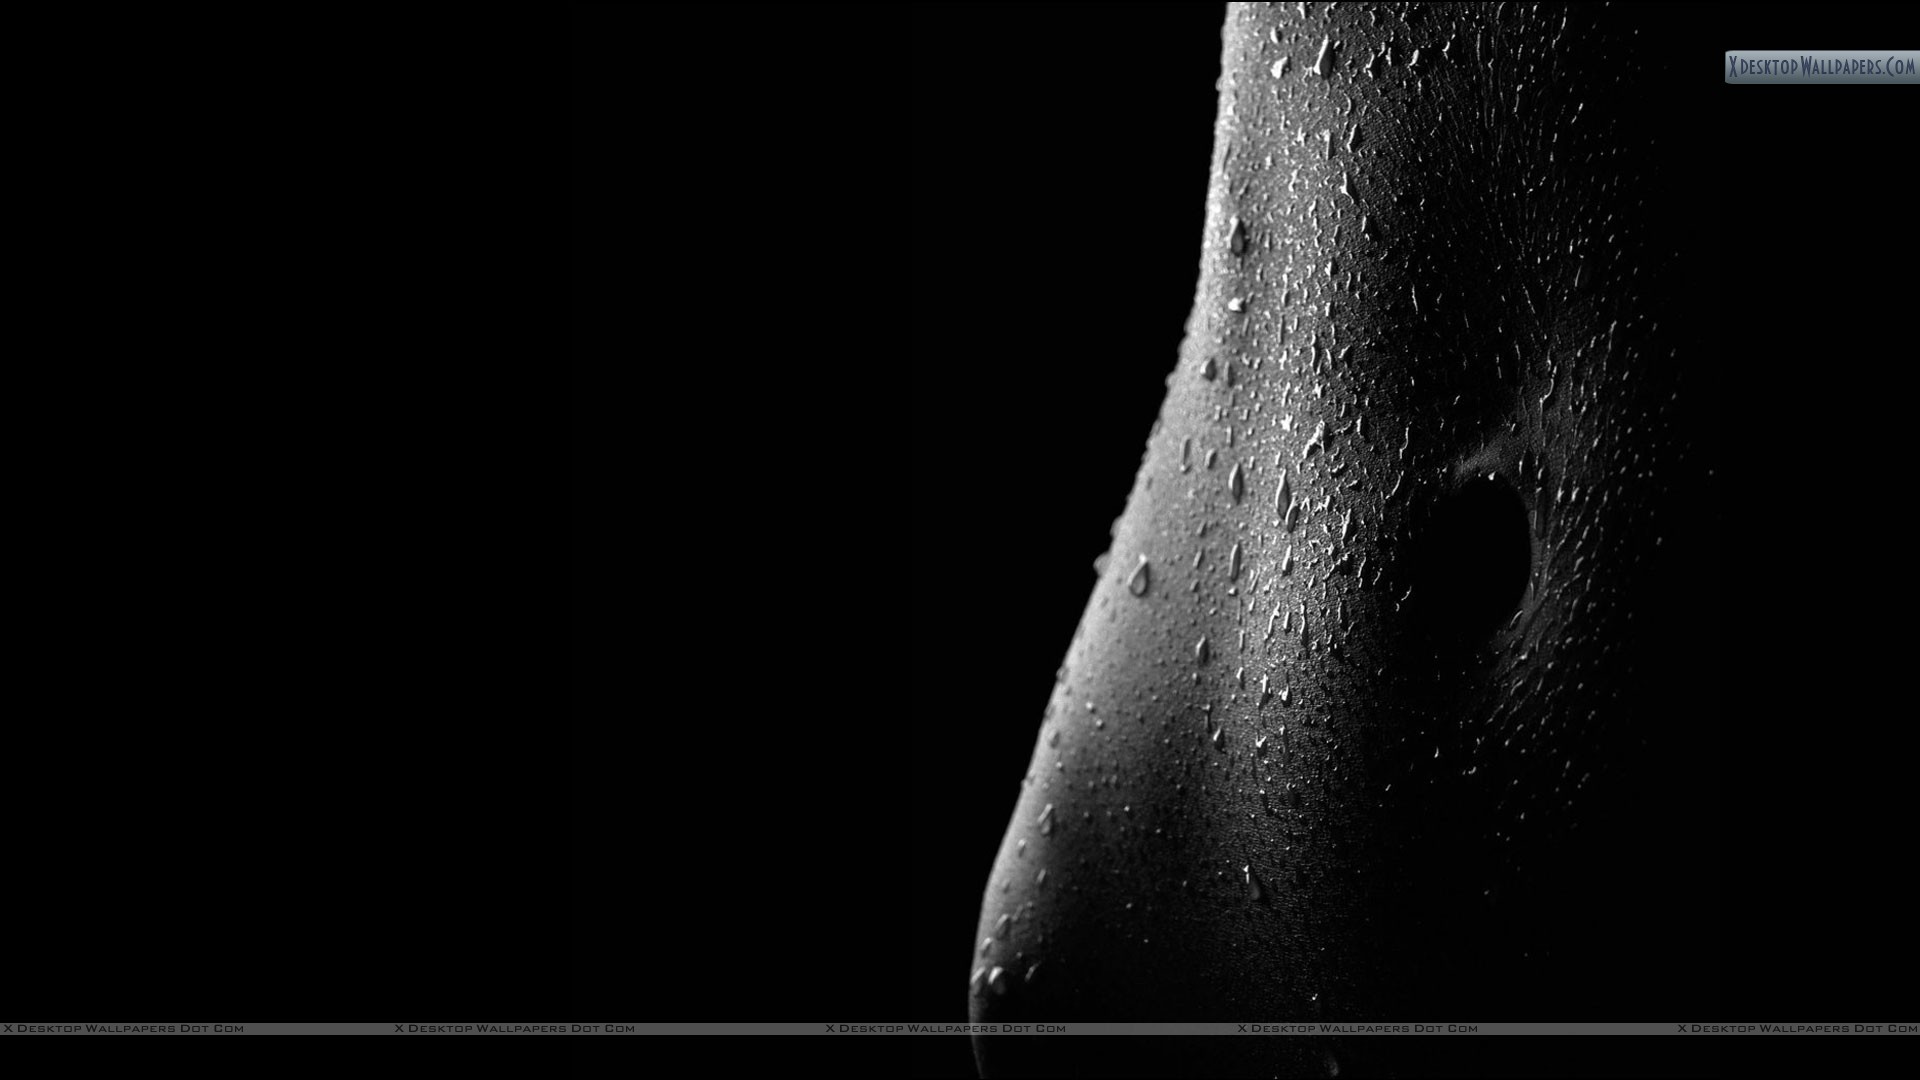 Free Download Skin With Water Drops Black N White Wallpaper 1920x1080 For Your Desktop Mobile